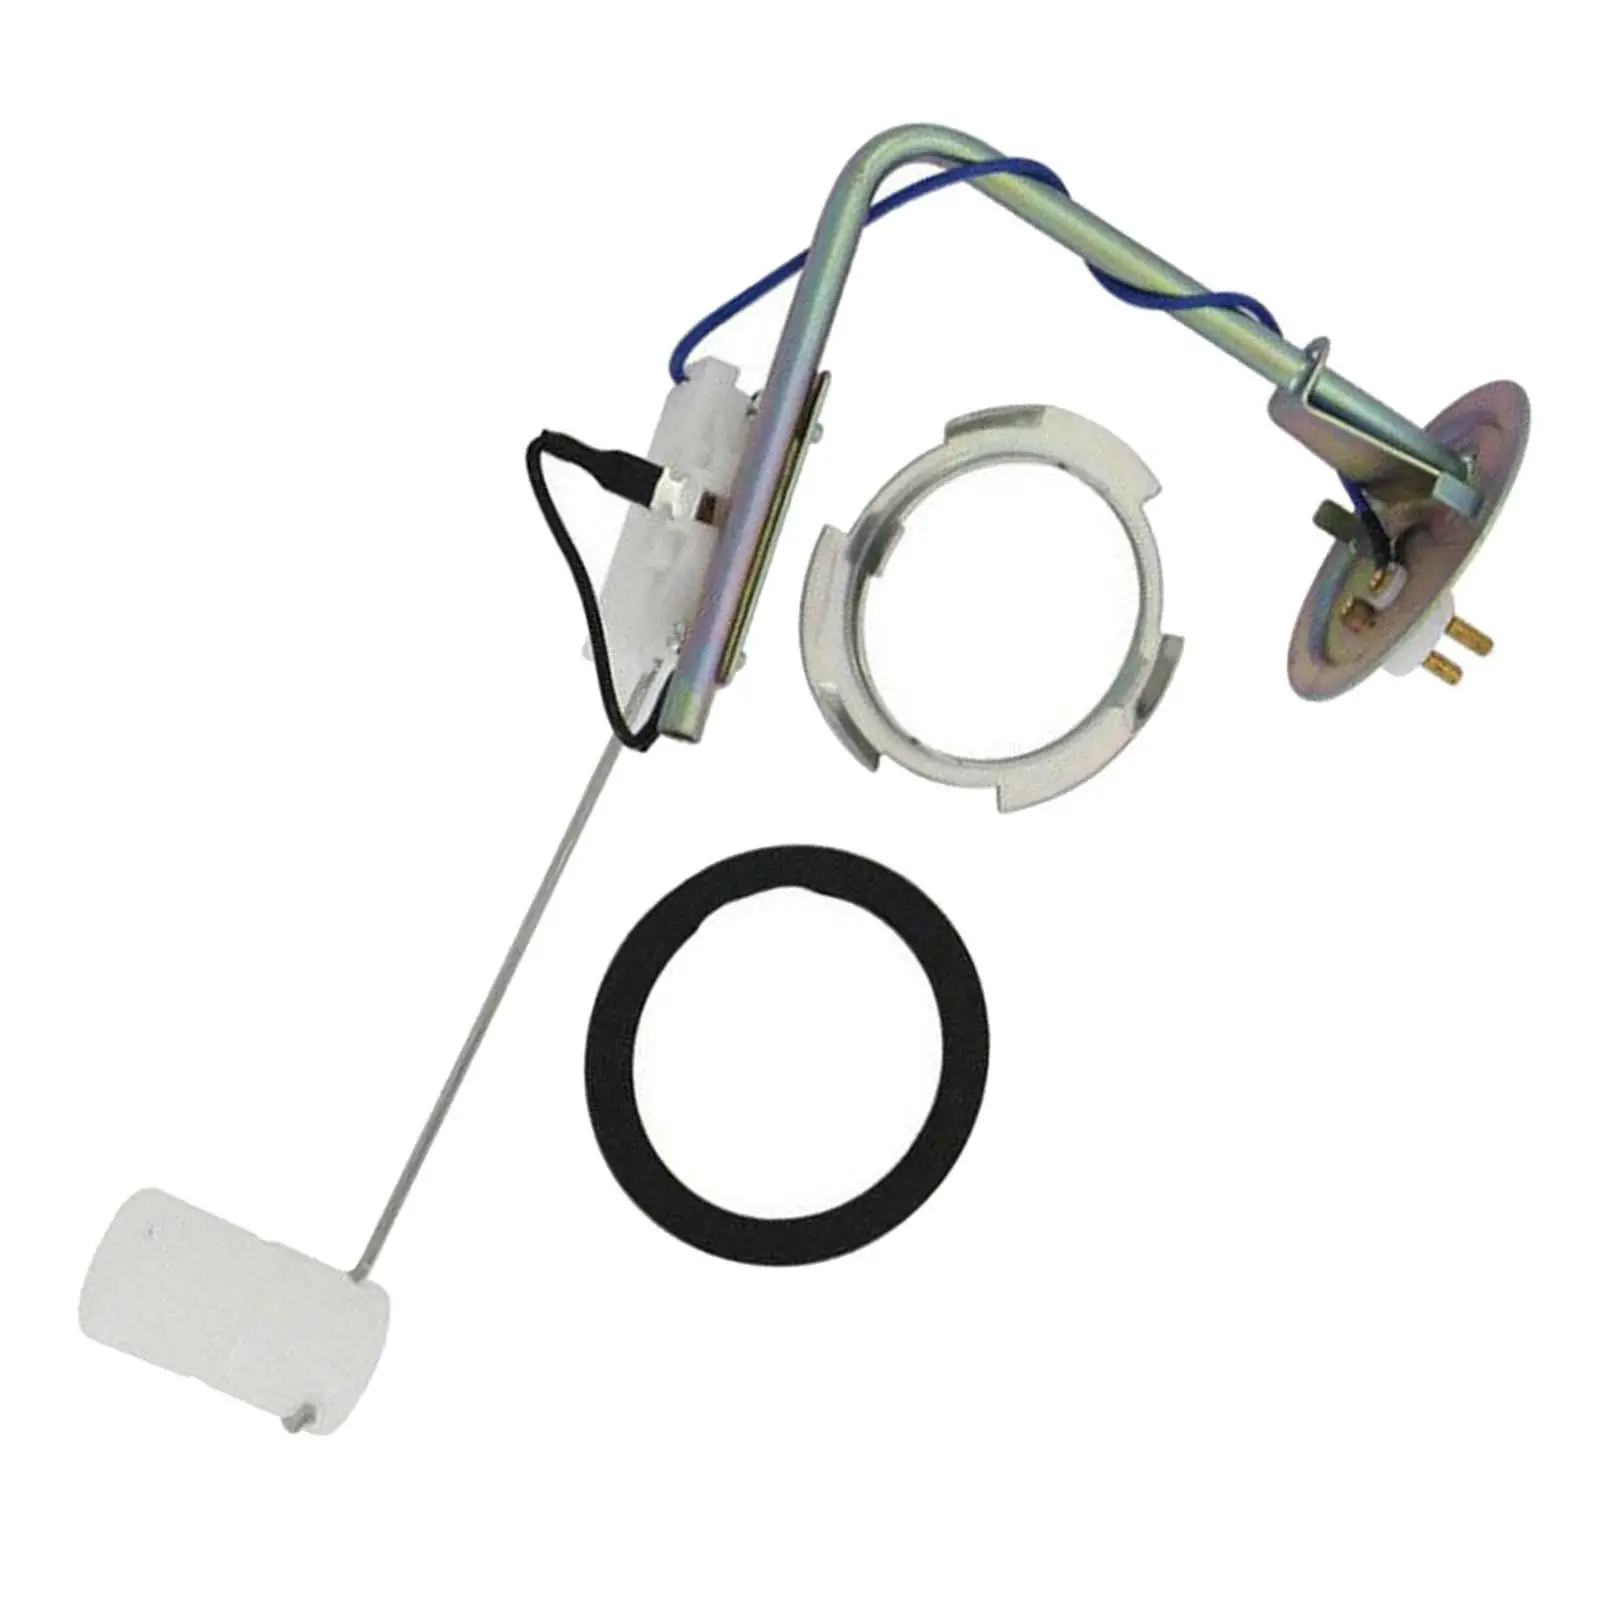 Fuel Pump Sender Professional Repair Parts Durable Replacement Spare Parts Easy to Install E0LY-9275-b for Lincoln Mercury